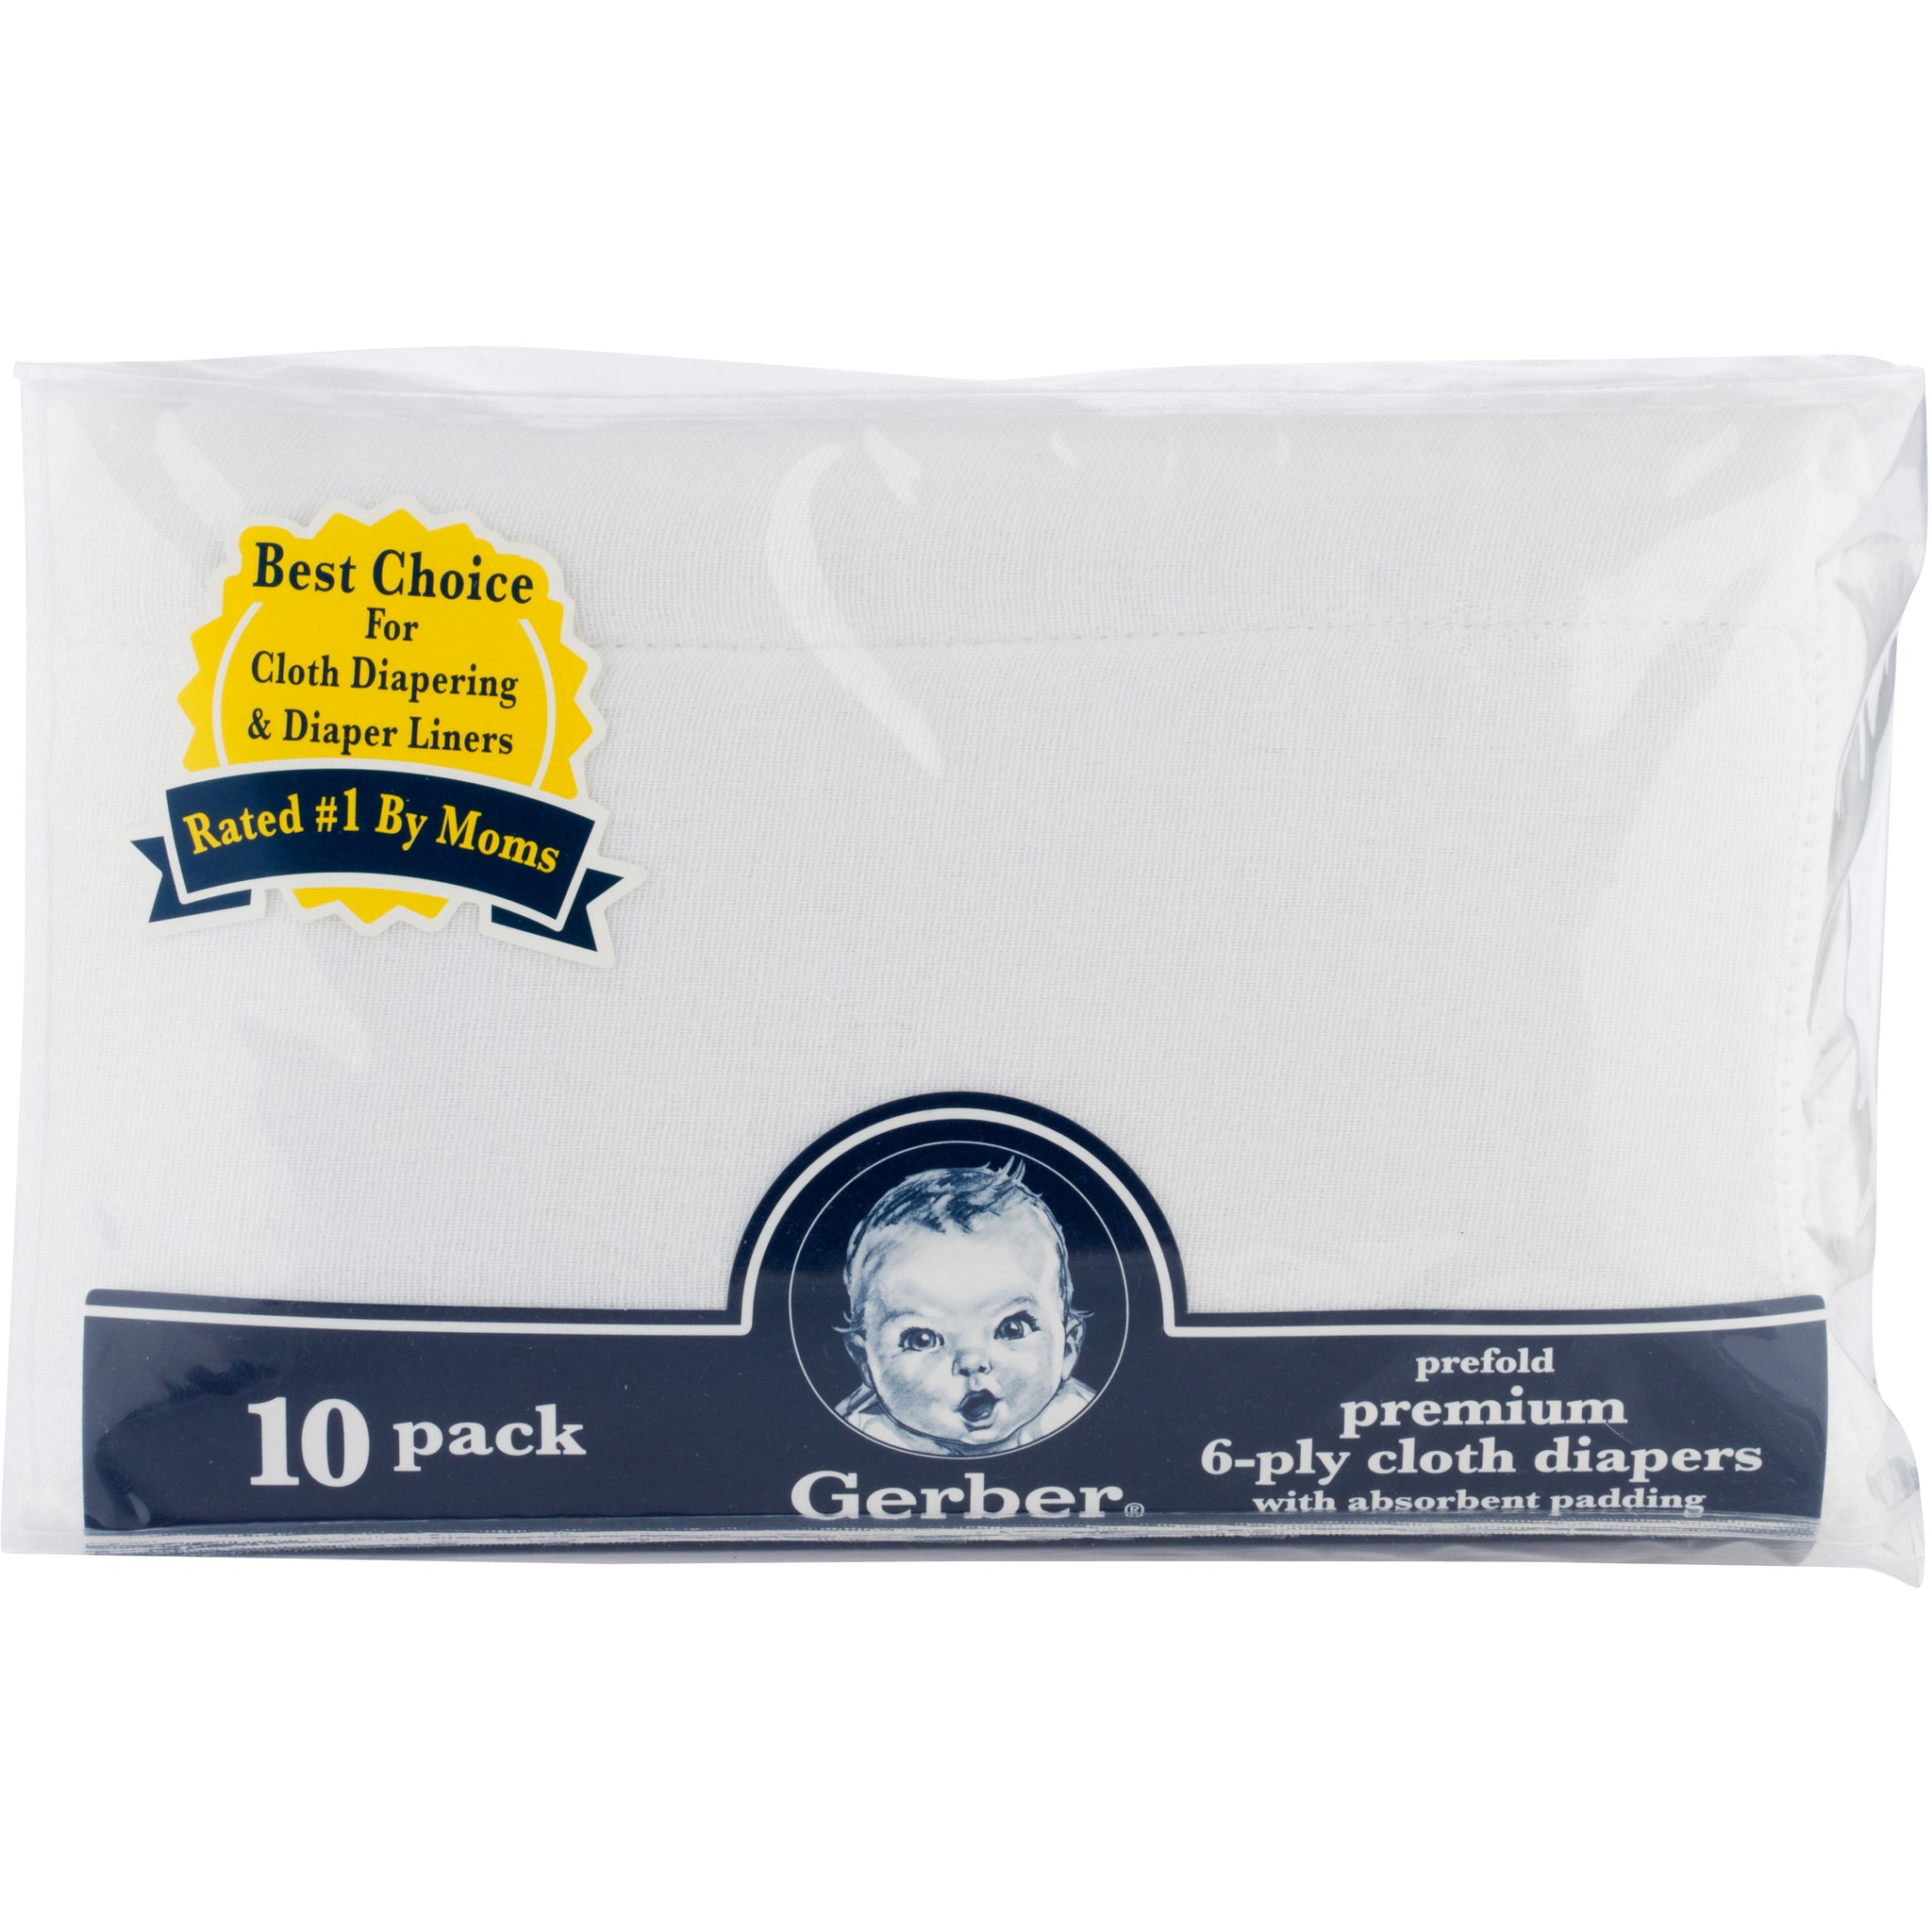 10pk White Gauze Prefold Cloth Diapers - 6-ply with Absorbent Padding-Gerber Childrenswear Wholesale